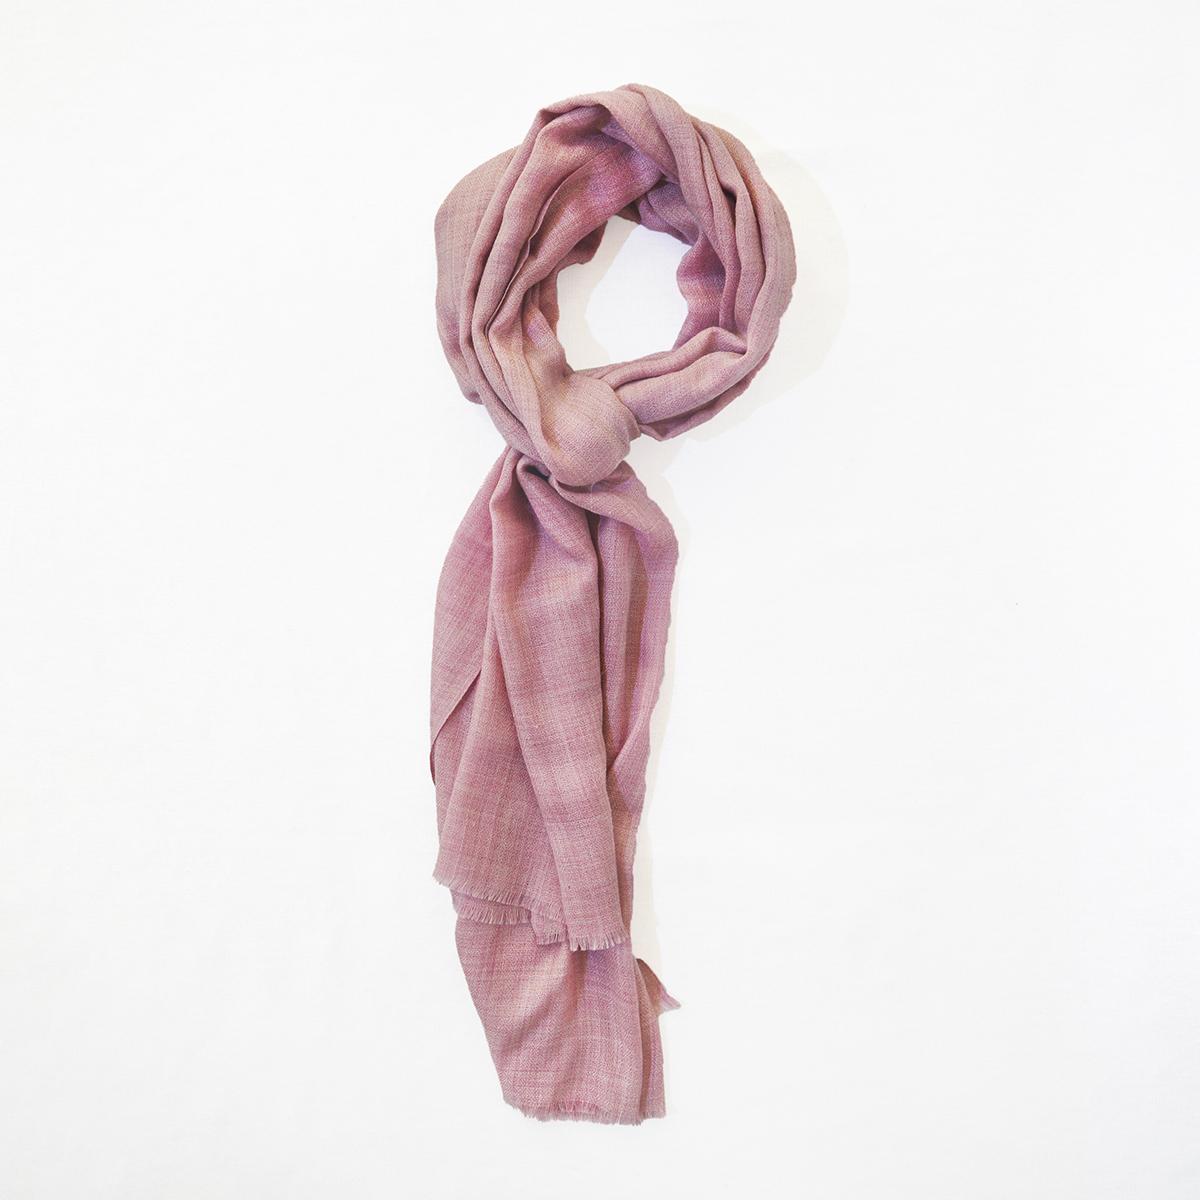 BLUSH fine wool scarf women, solid colour, reversible, fashion shawl or stole or wrap, gift for women